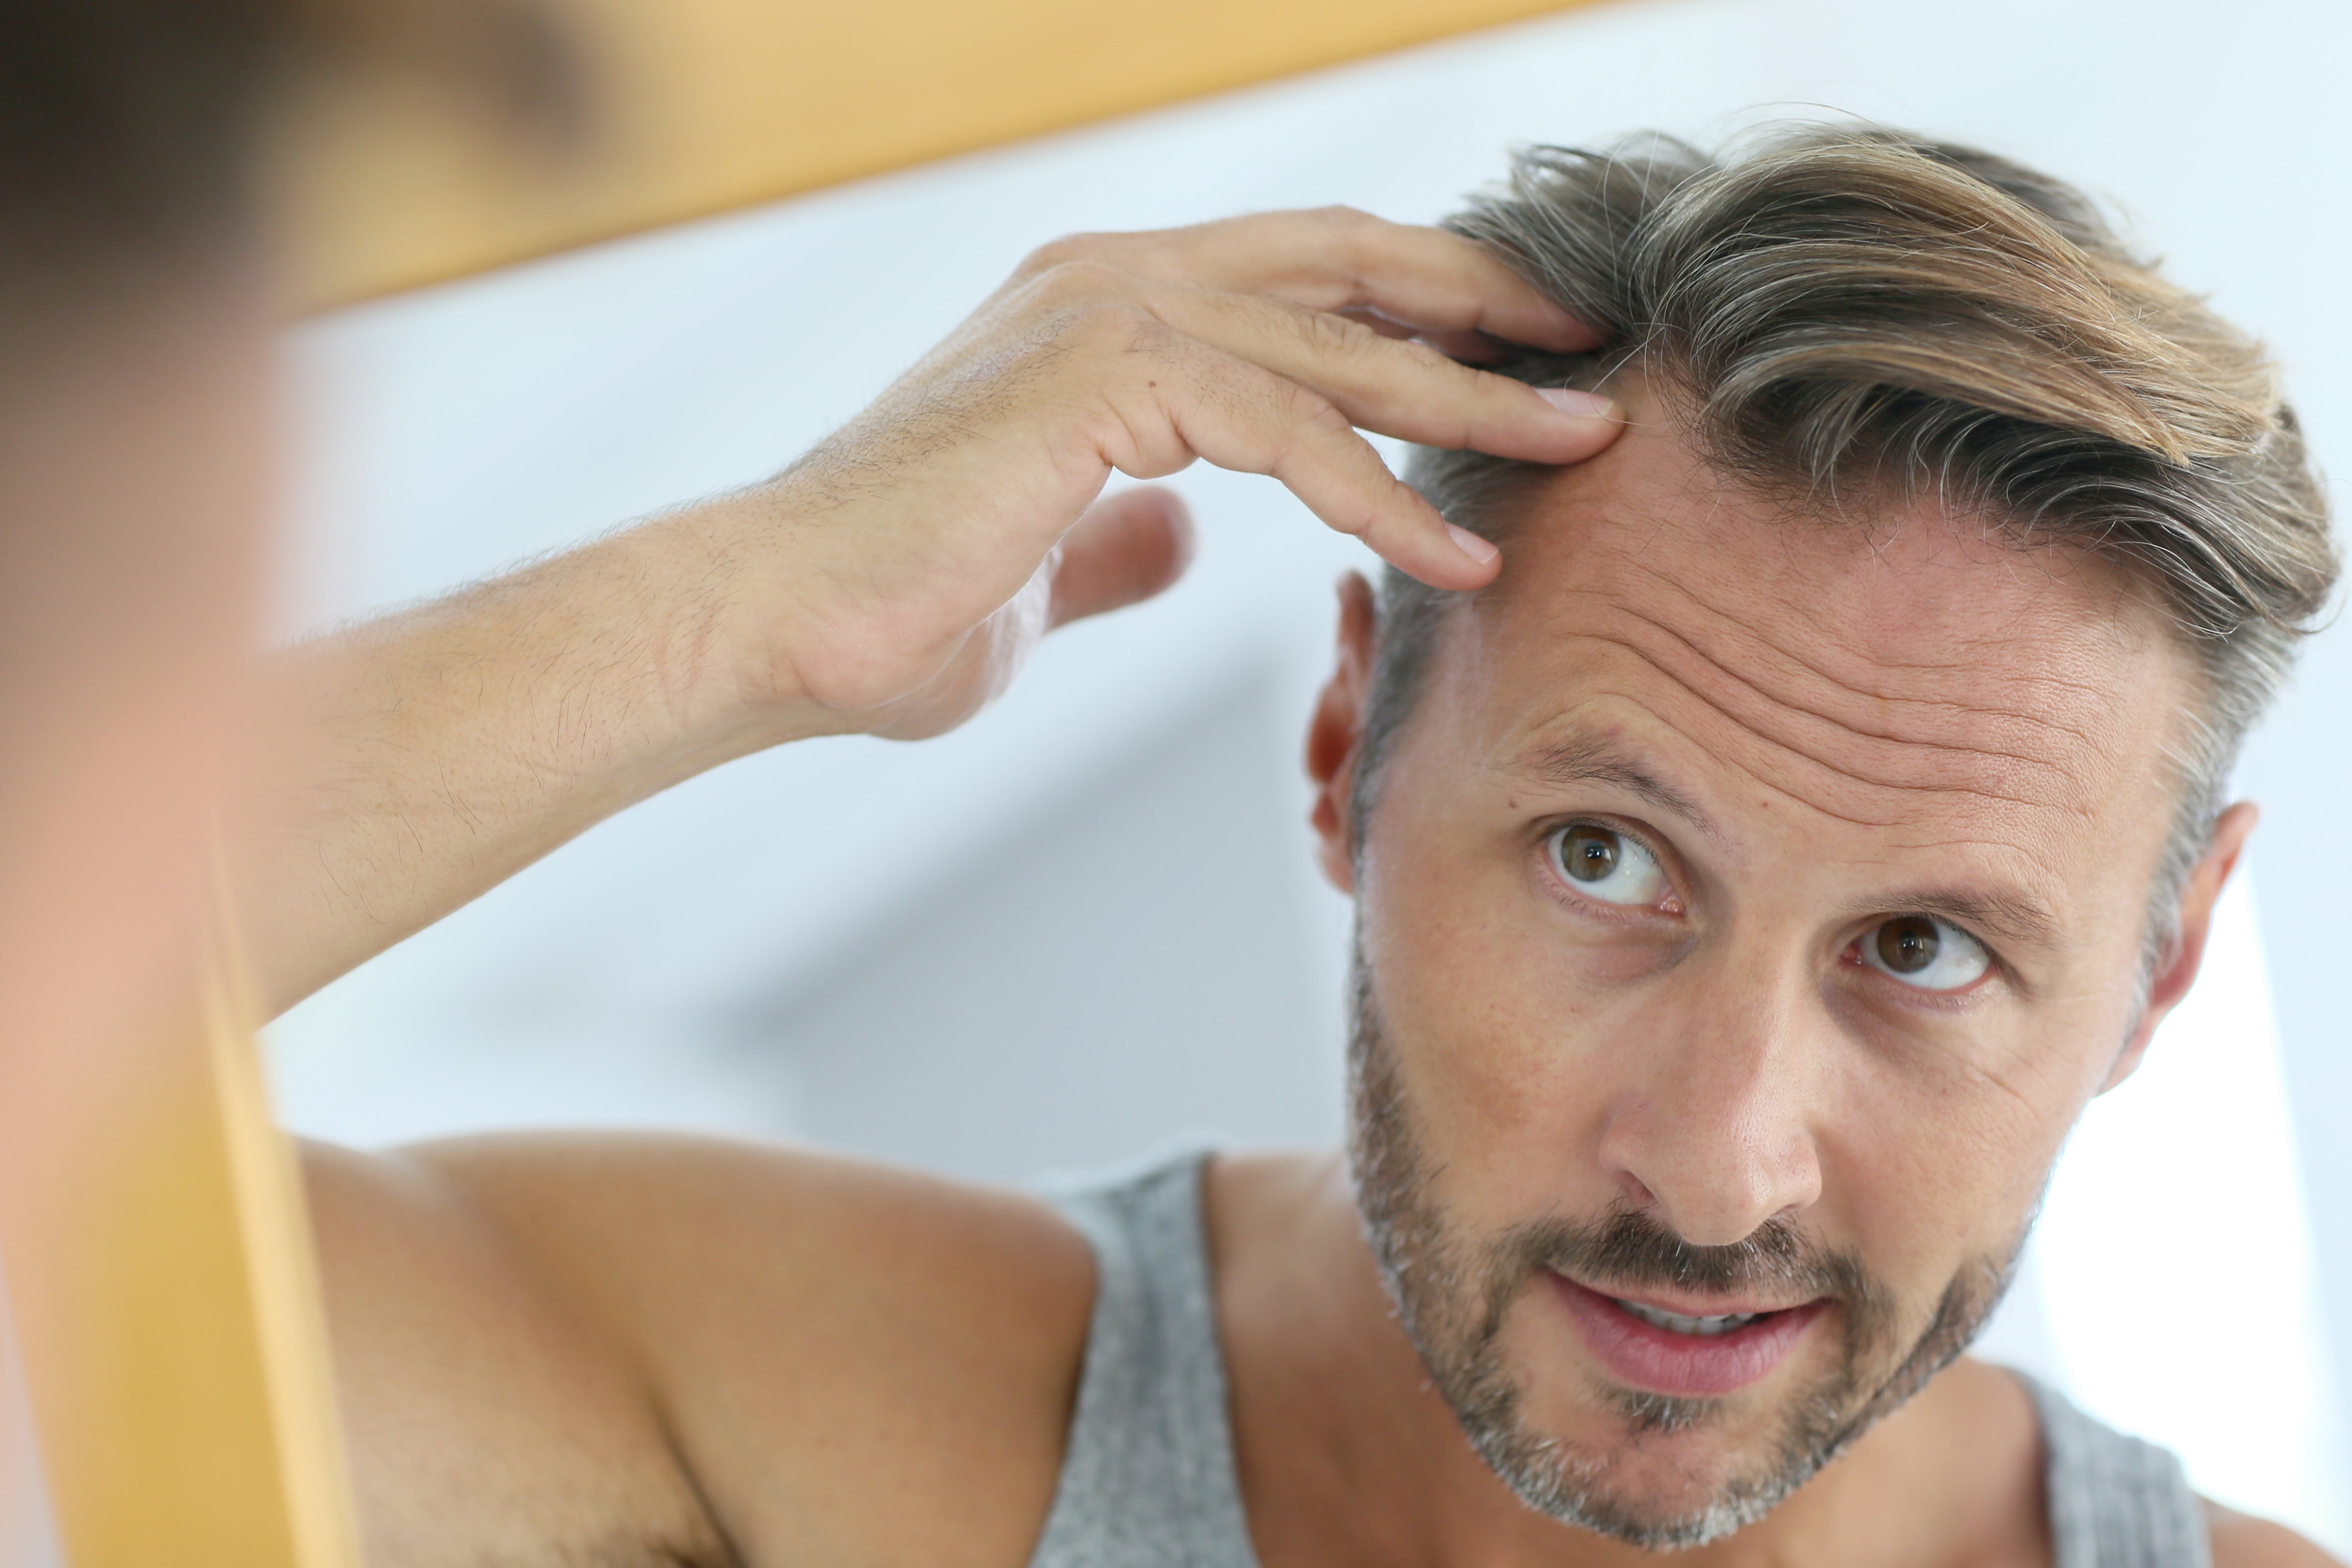 Hair loss: why it happens and how to deal with it